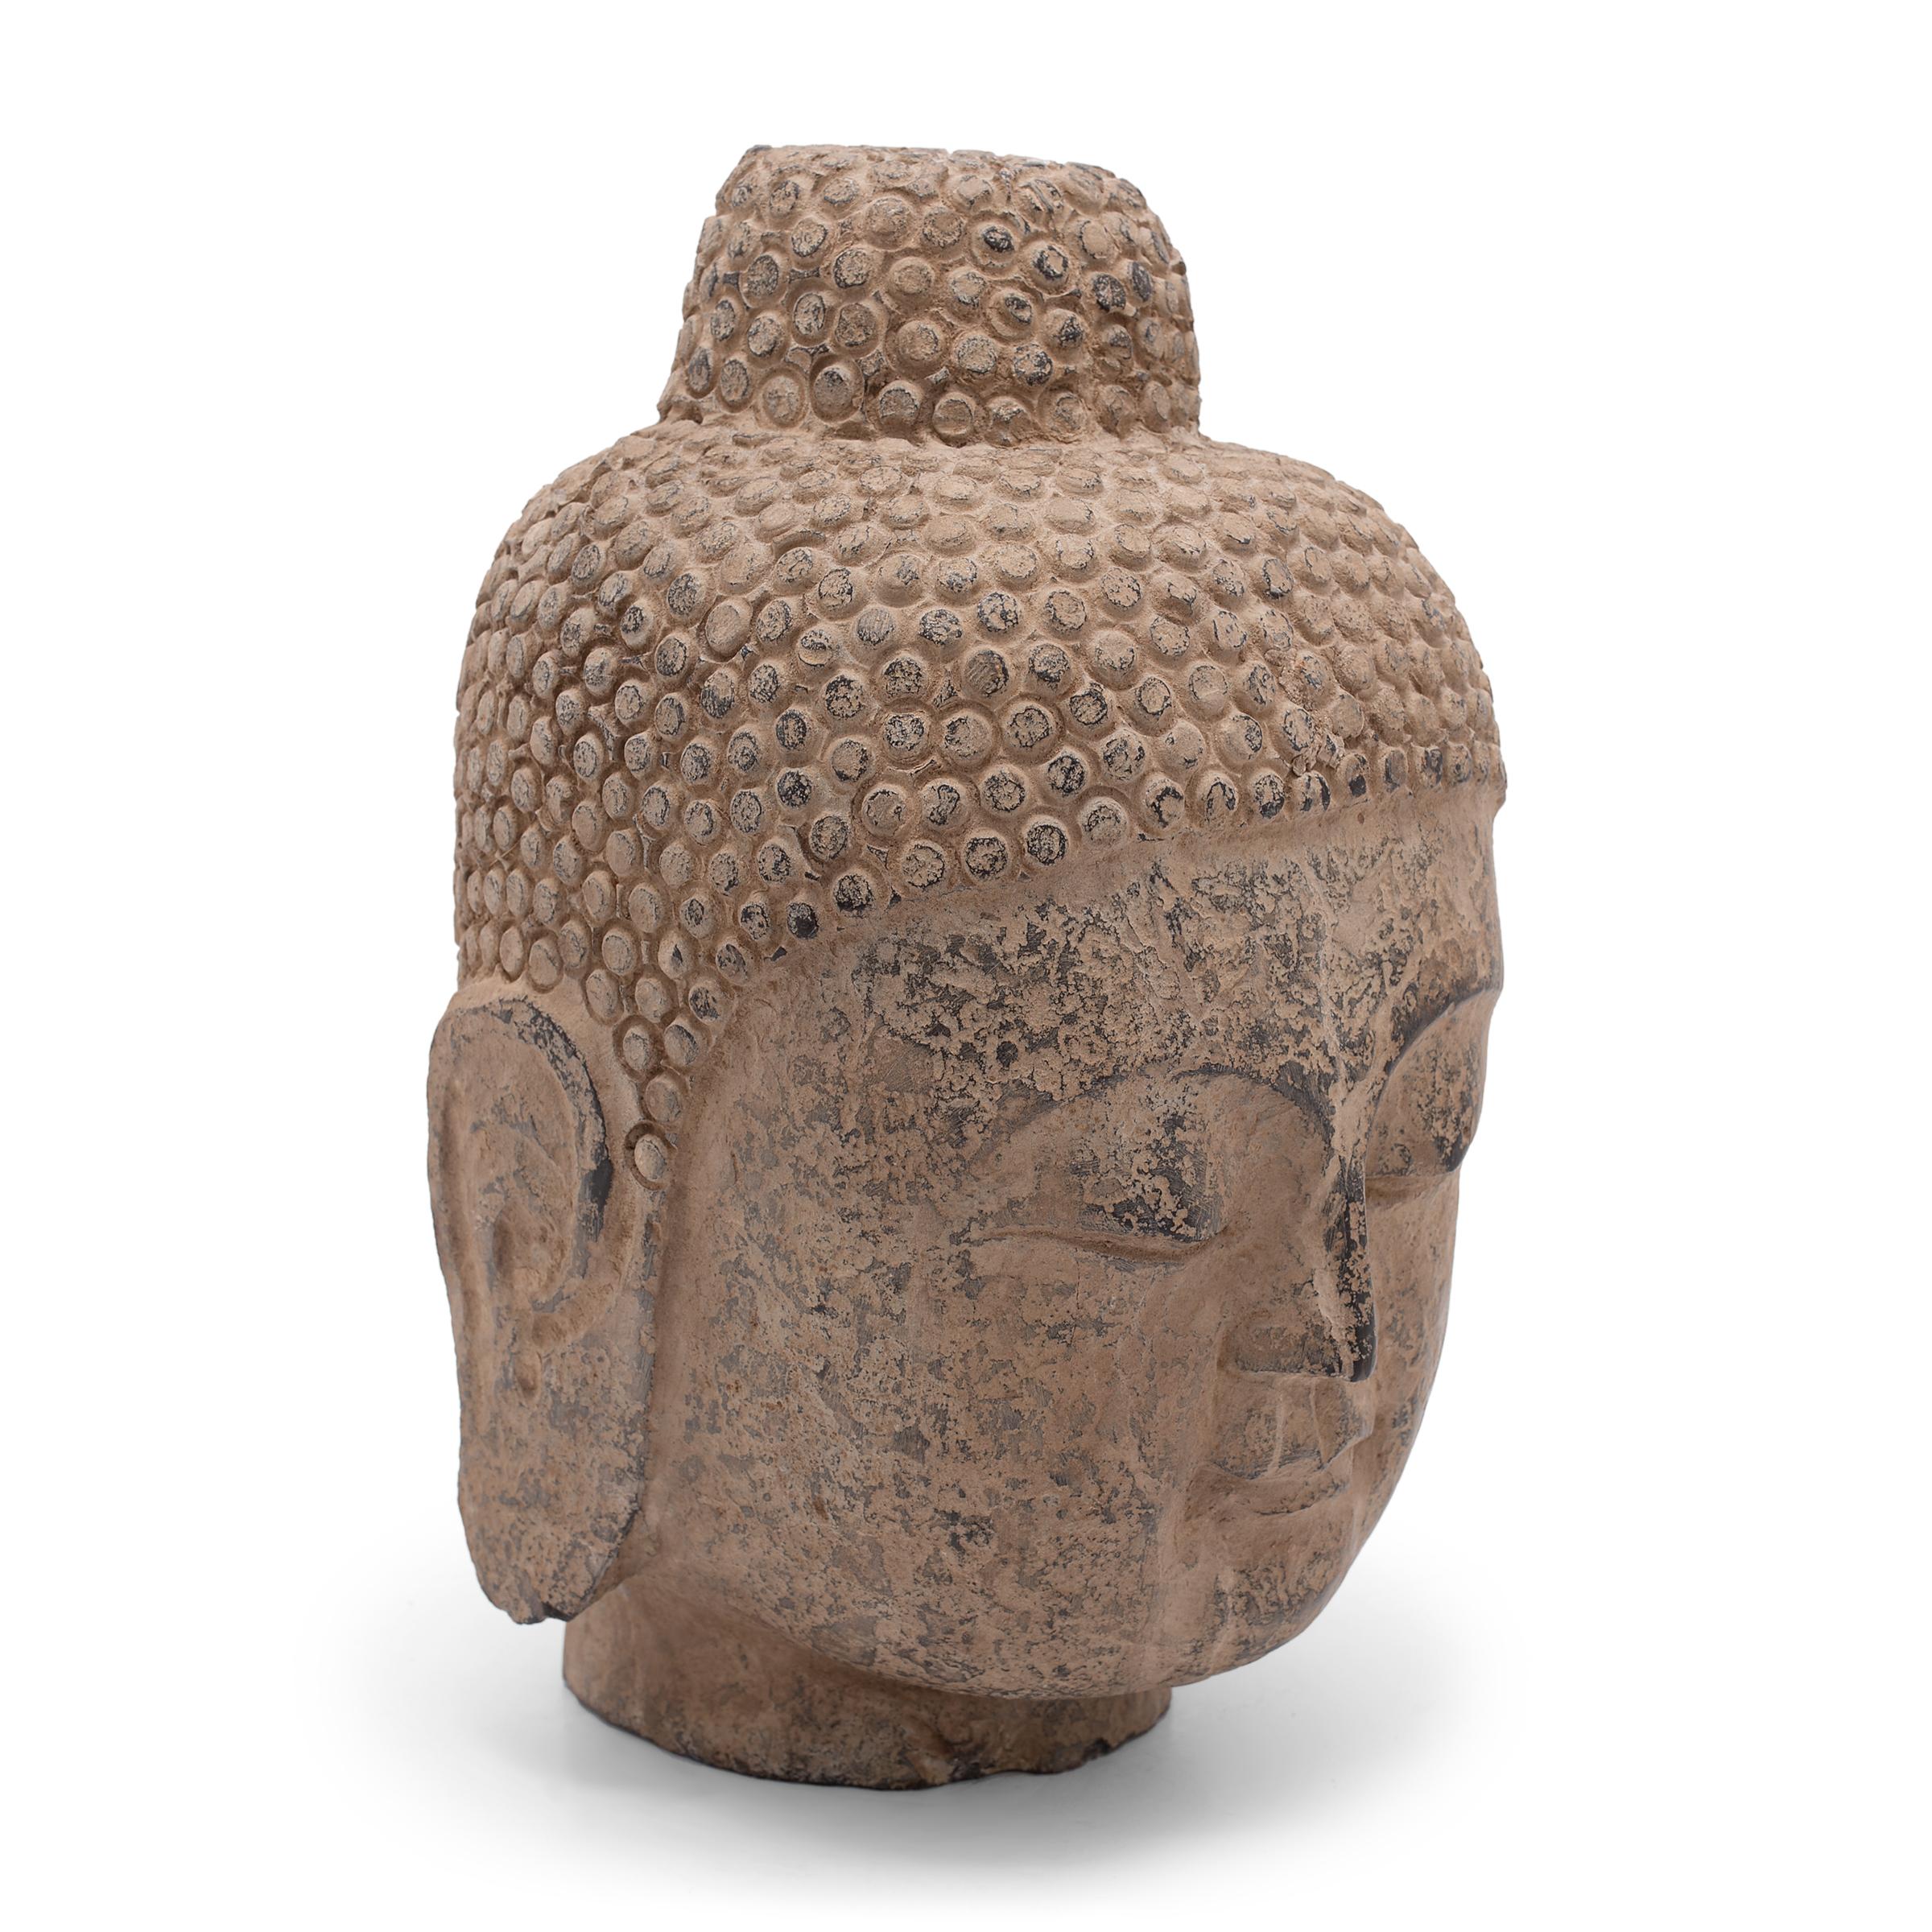 With closed eyes and a gentle expression, this large stone Buddha head brings calm and serenity to its surroundings. The hand-carved figure depicts the historic Buddha Shakyamuni, also known as Shaka, Gautama Buddha, or Prince Siddhartha. Commonly